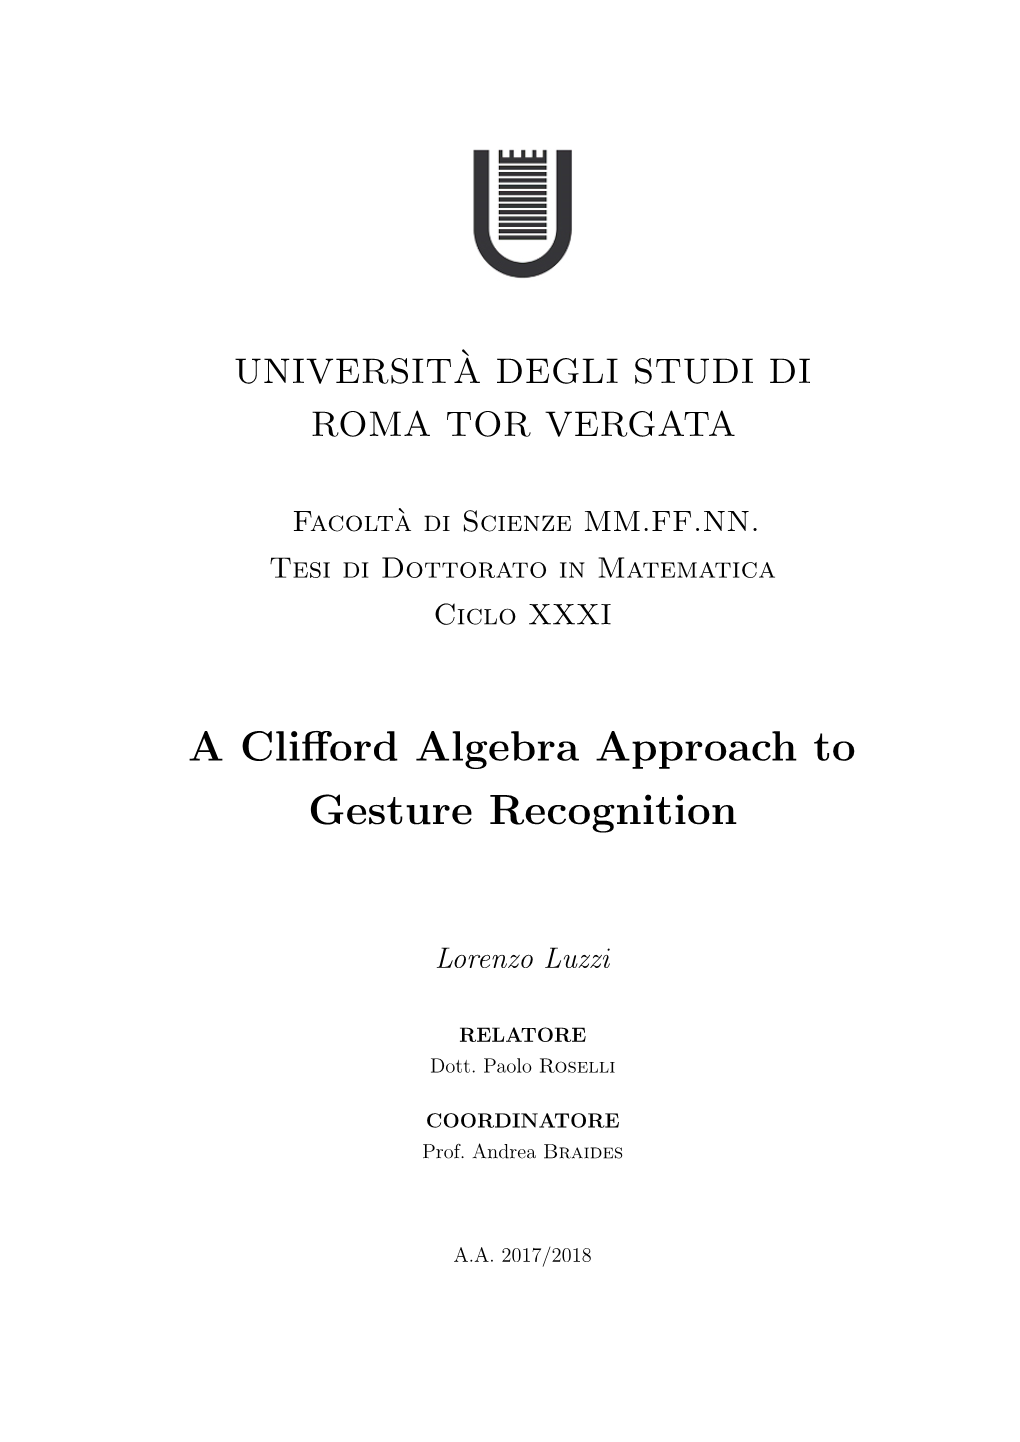 A Clifford Algebra Approach to Gesture Recognition